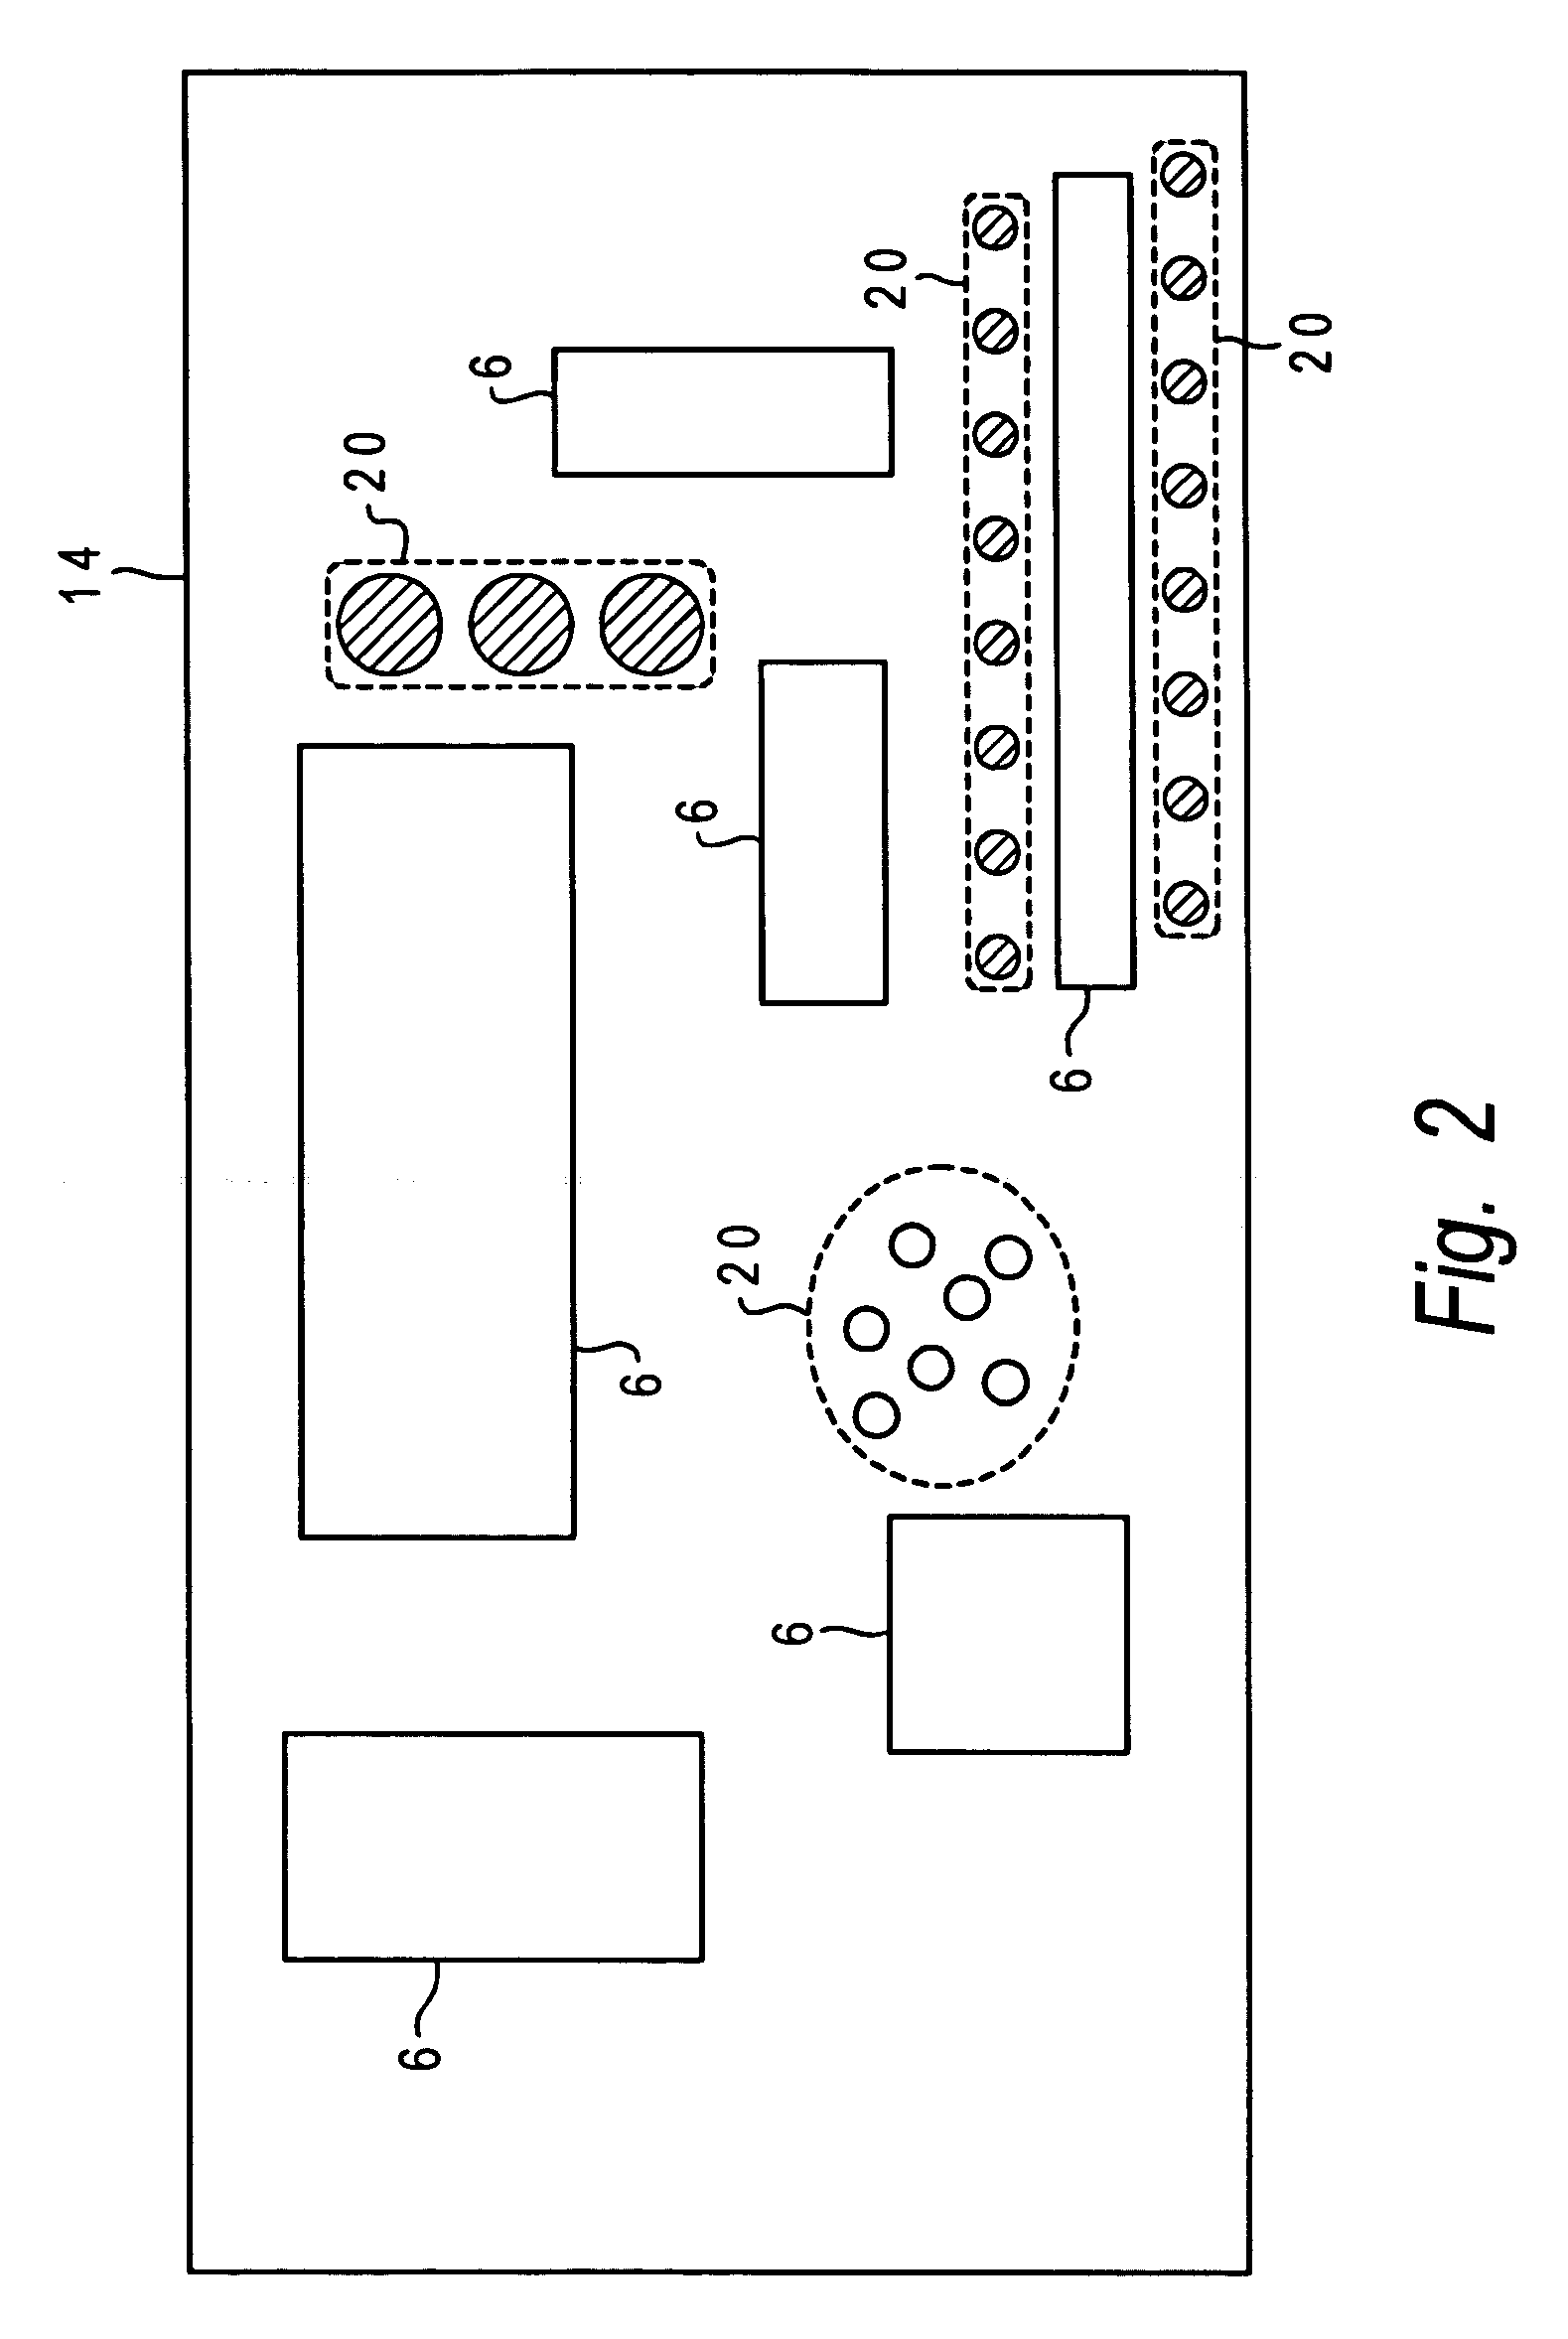 Cooling apparatus for vertically stacked printed circuit boards